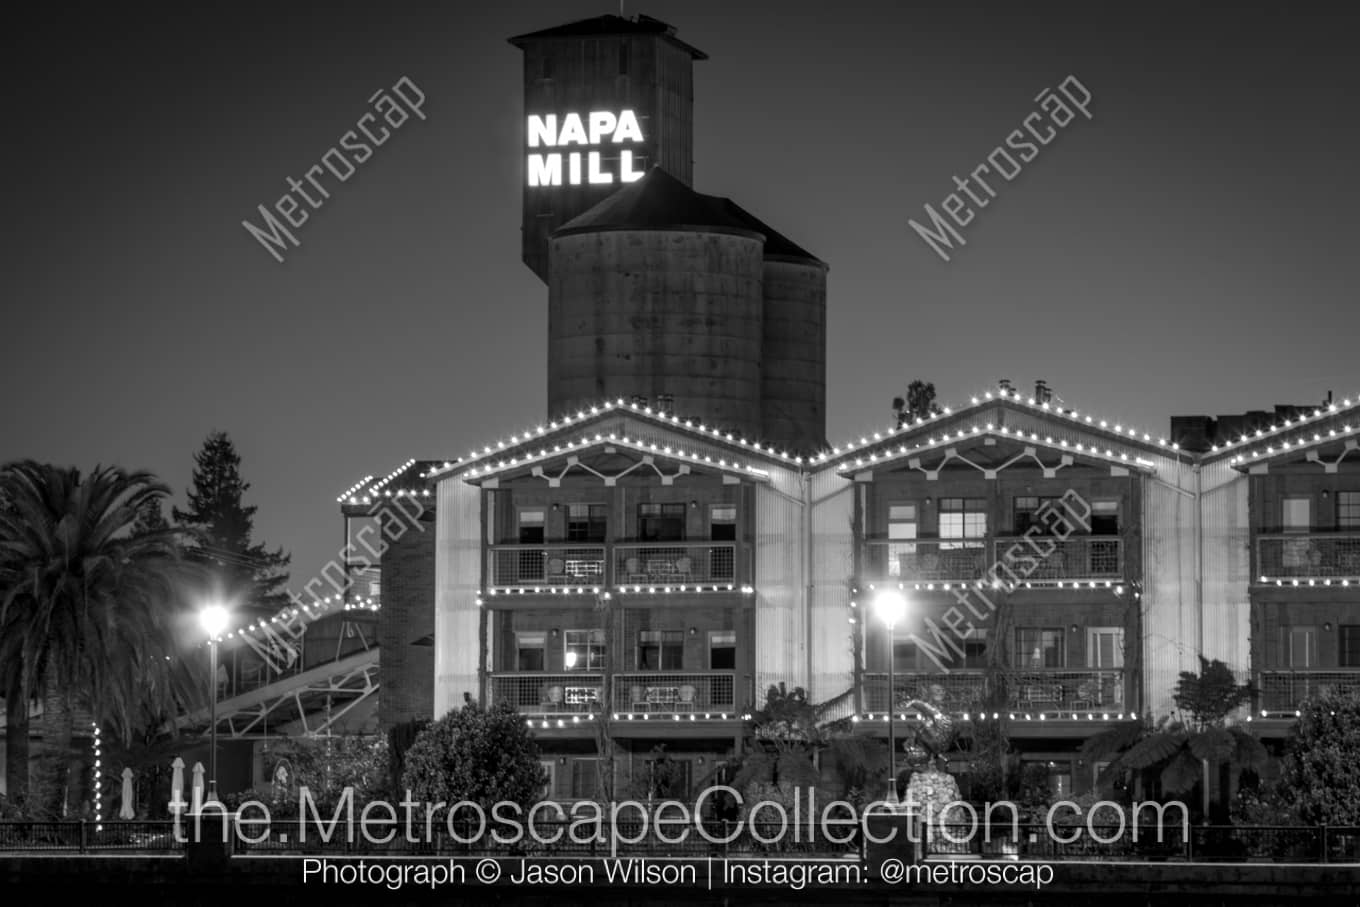 Napa-Valley California Picture at Night